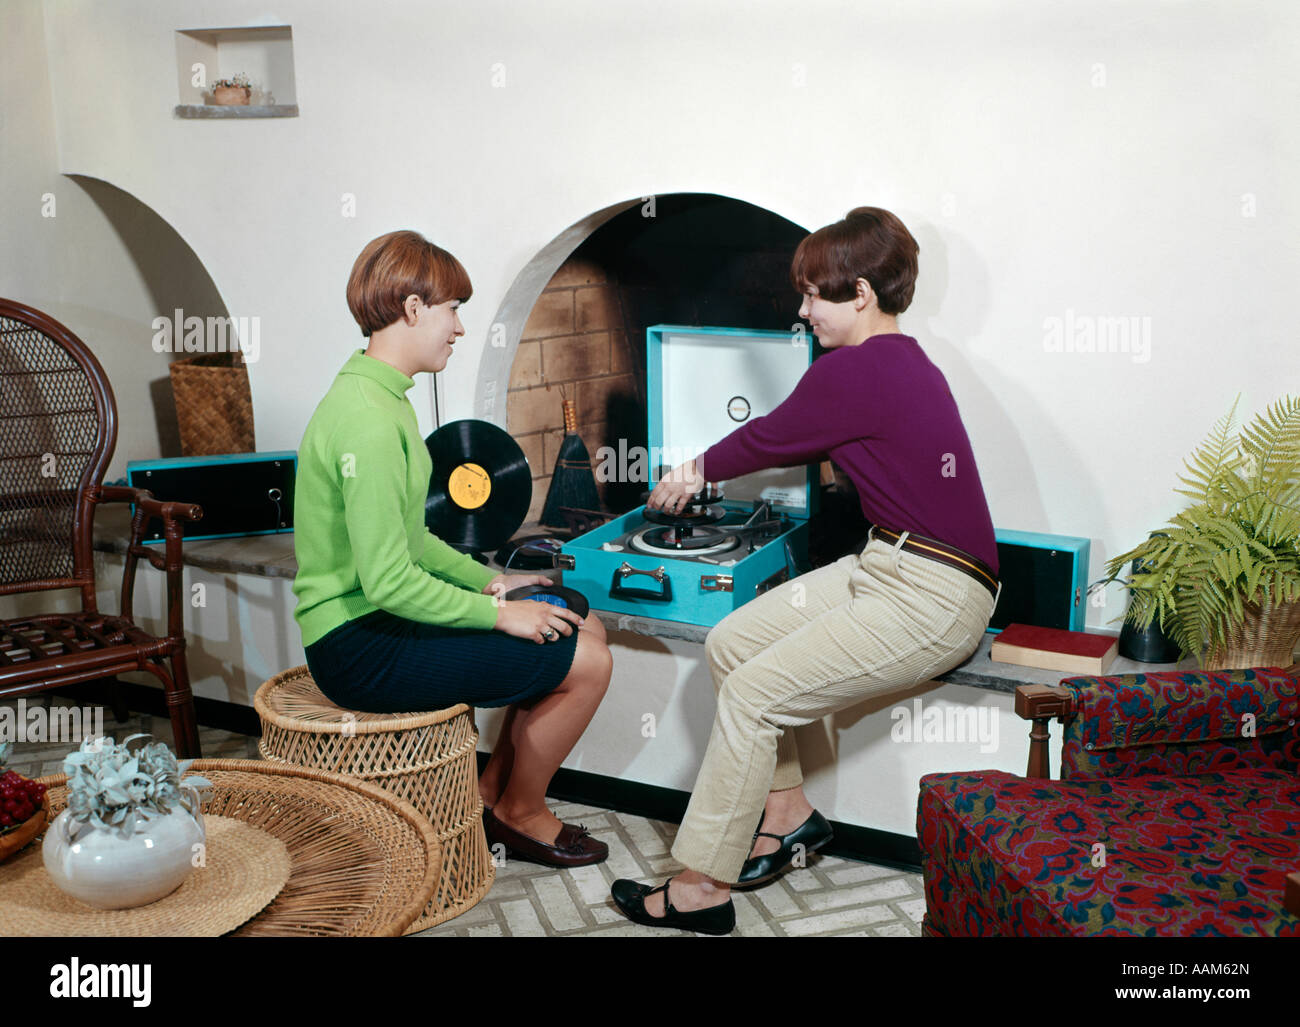 1960s TWO TEENAGED GIRLS PLAYING RECORDS ON PLAYER IN WALL NICHE IN LIVING ROOM Stock Photo